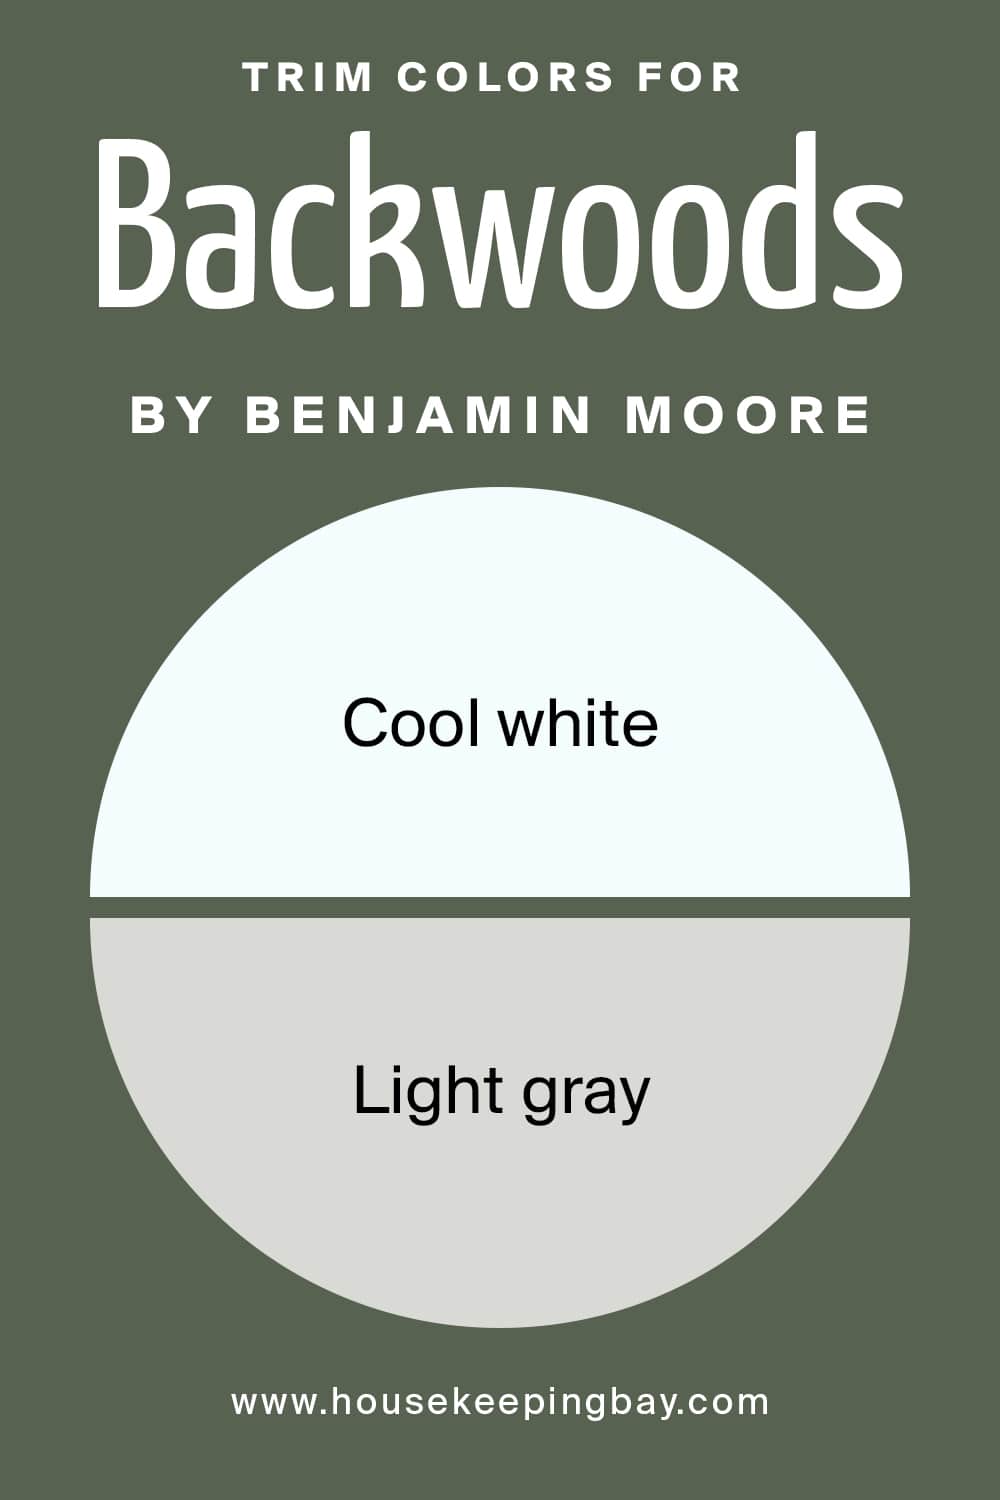 Trim Colors for Backwoods by Benjamin Moore,